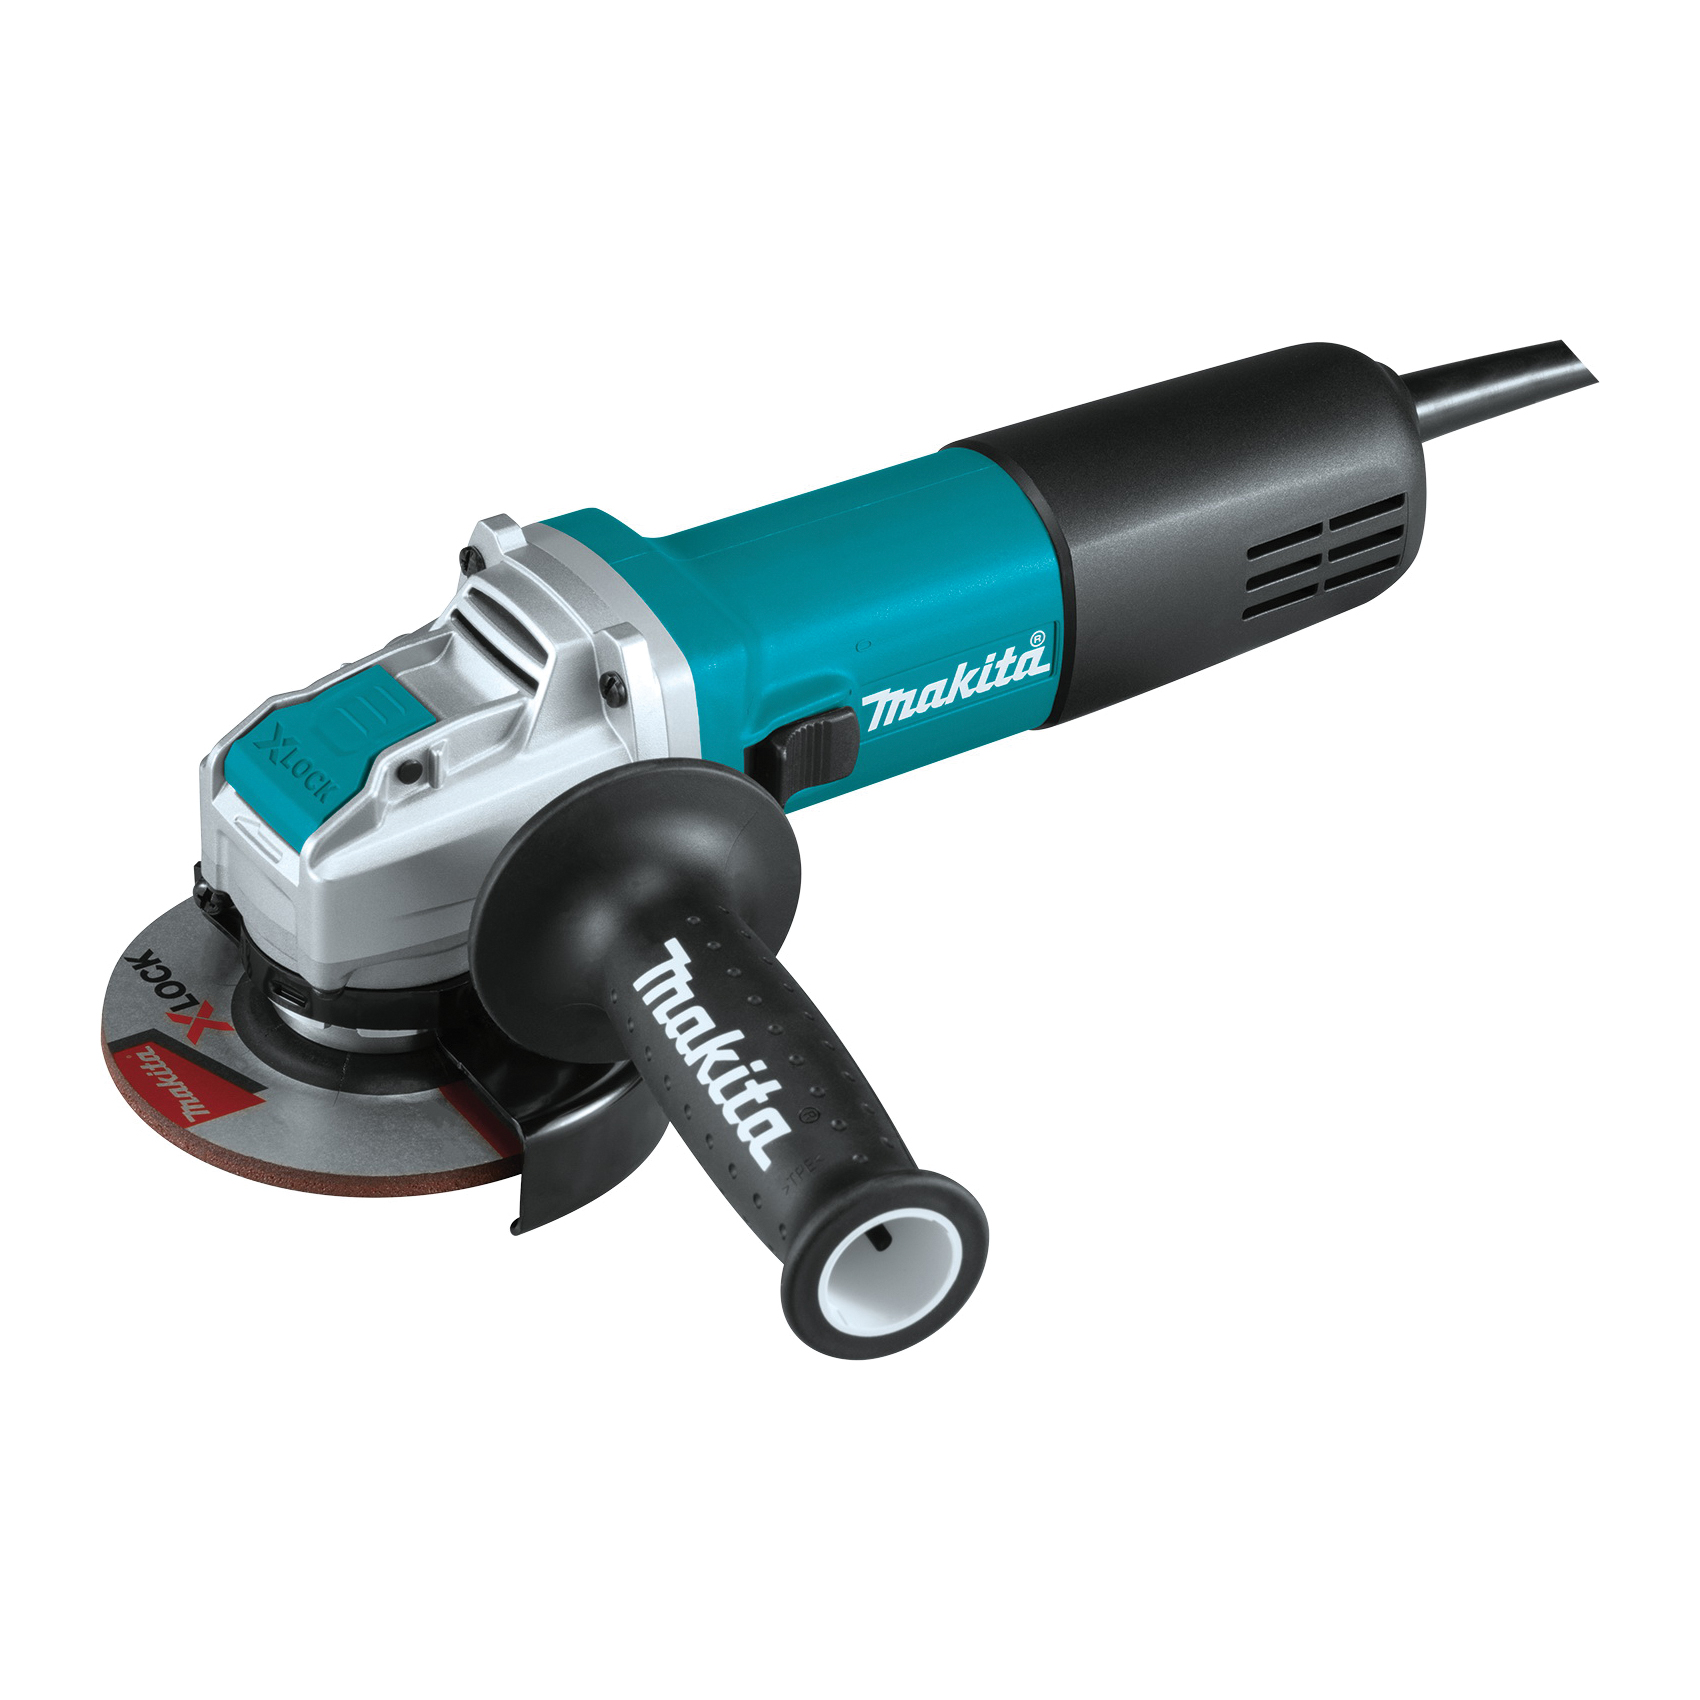 X-LOCK GA4570 Angle Grinder with AC/DC Switch, 7.5 A, 4-1/2 in Dia Wheel, 11,000 rpm Speed